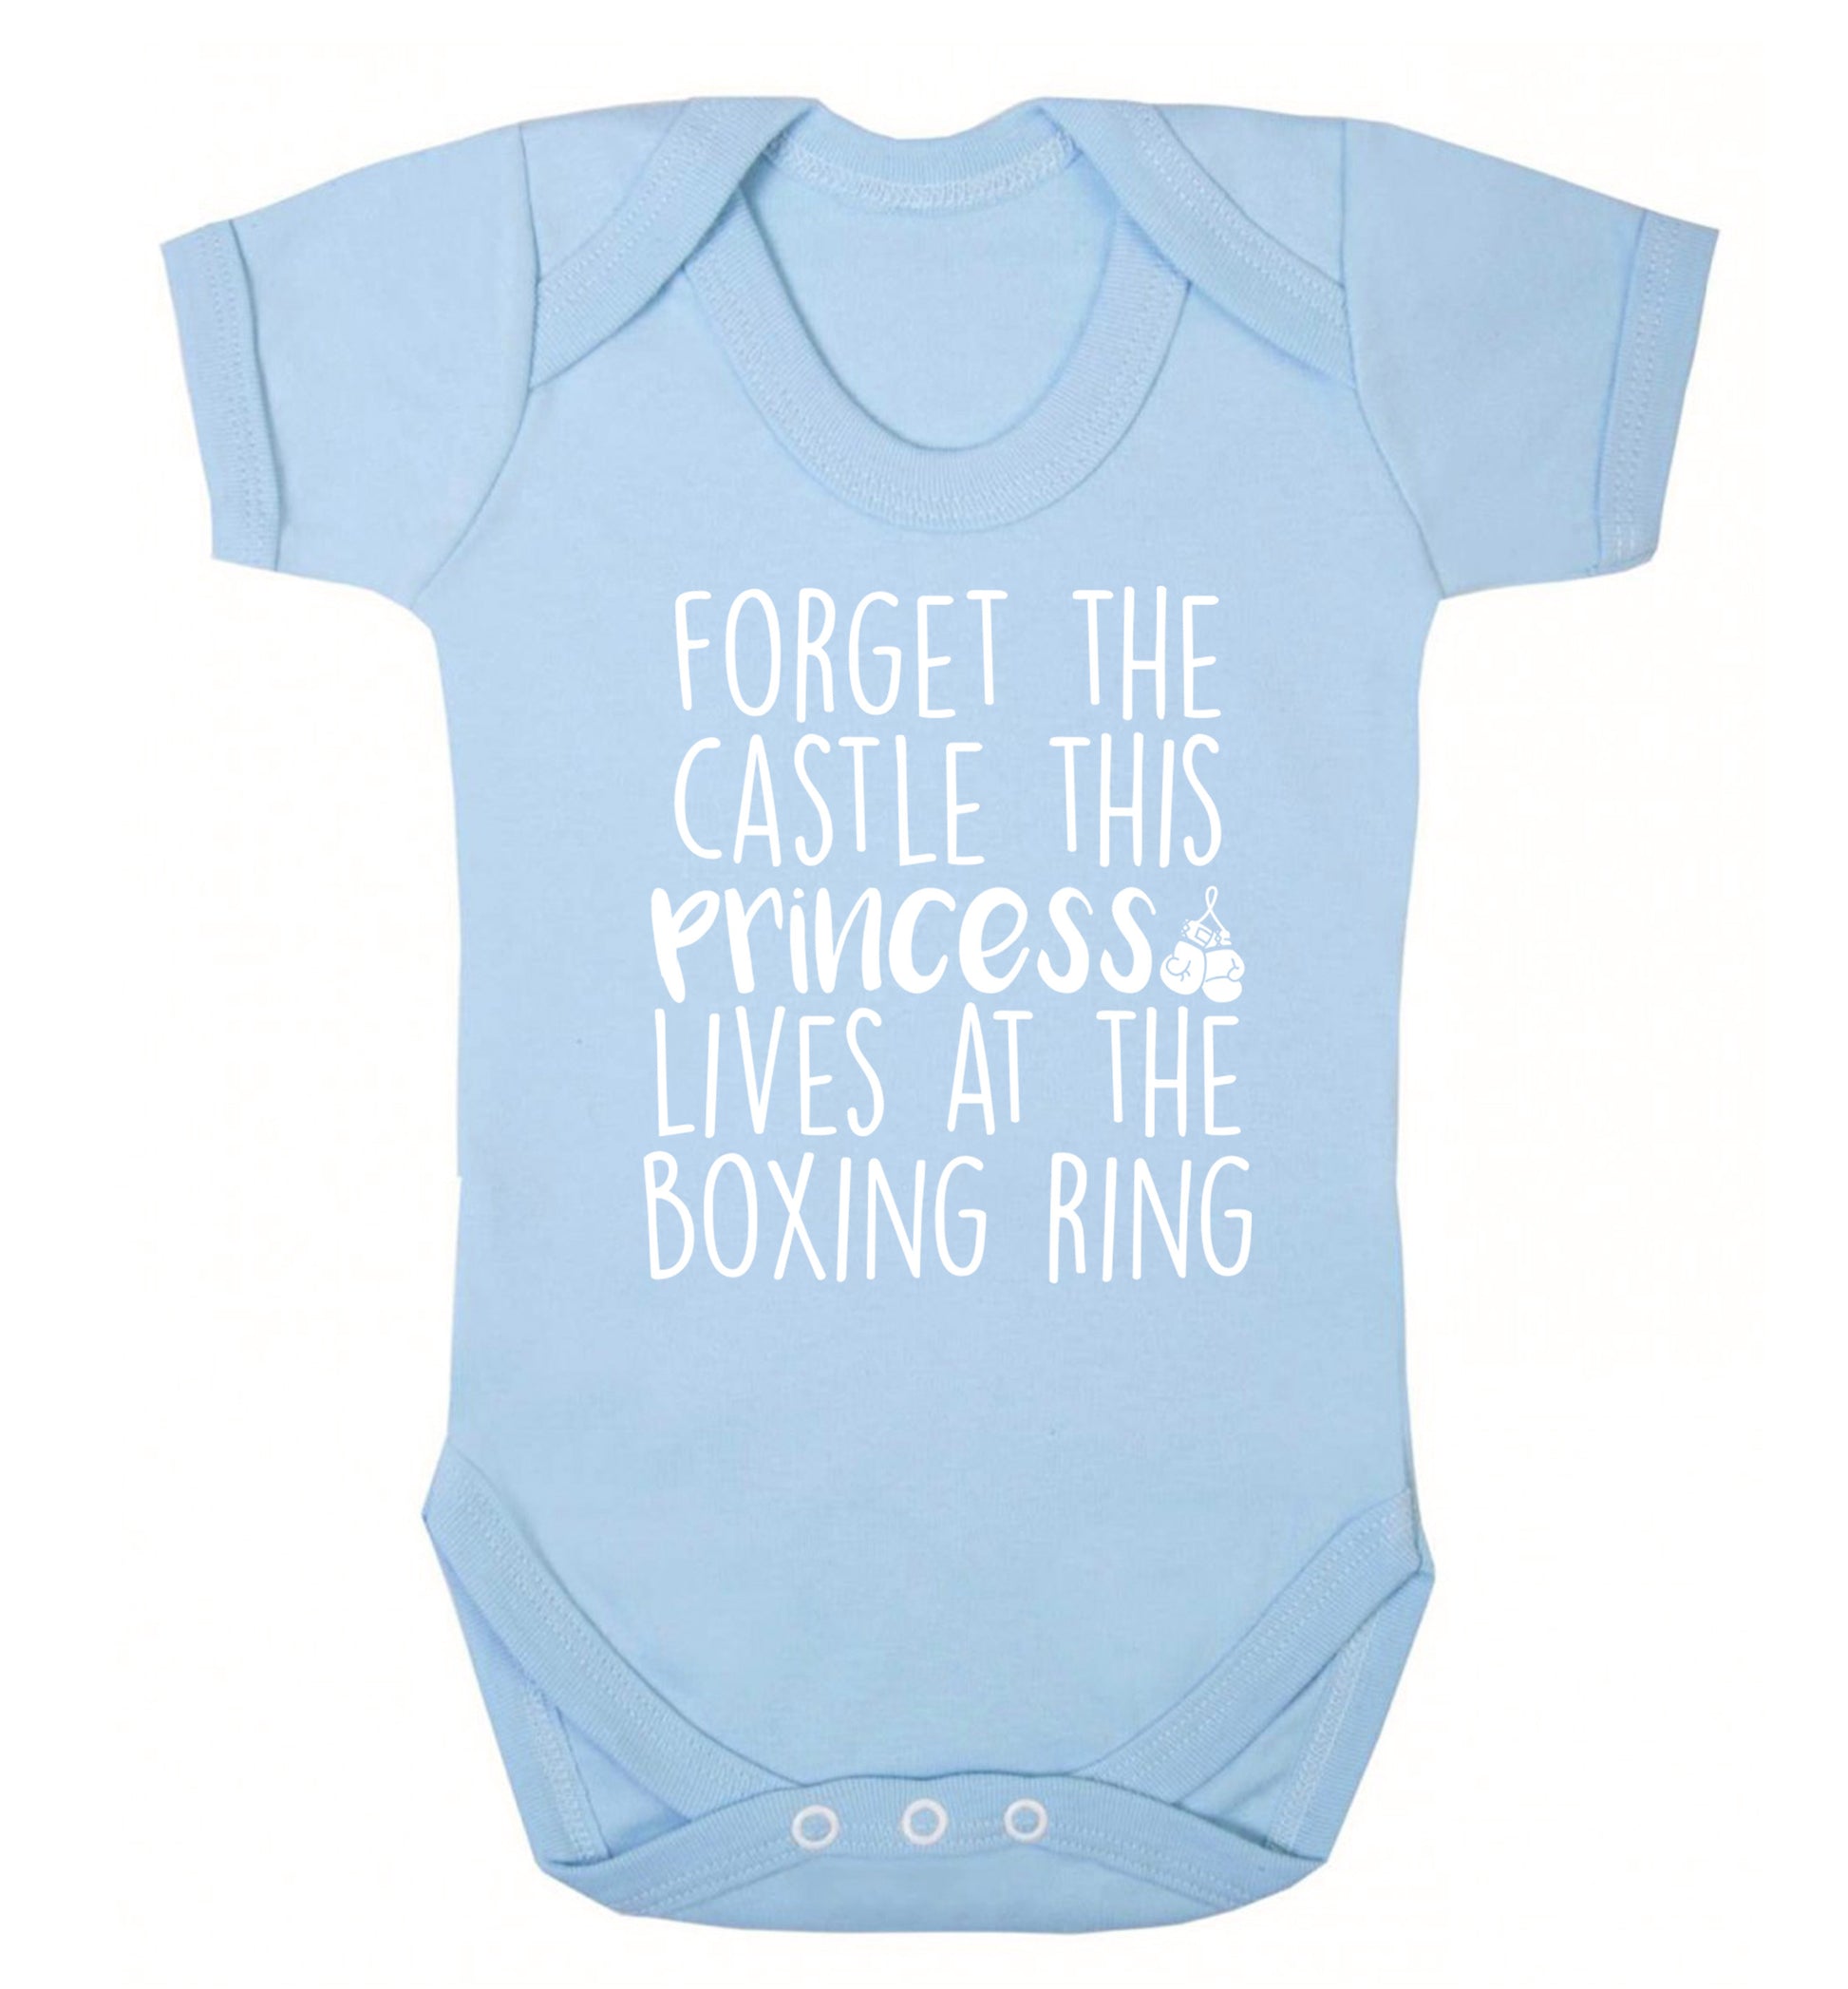 Forget the castle this princess lives at the boxing ring Baby Vest pale blue 18-24 months